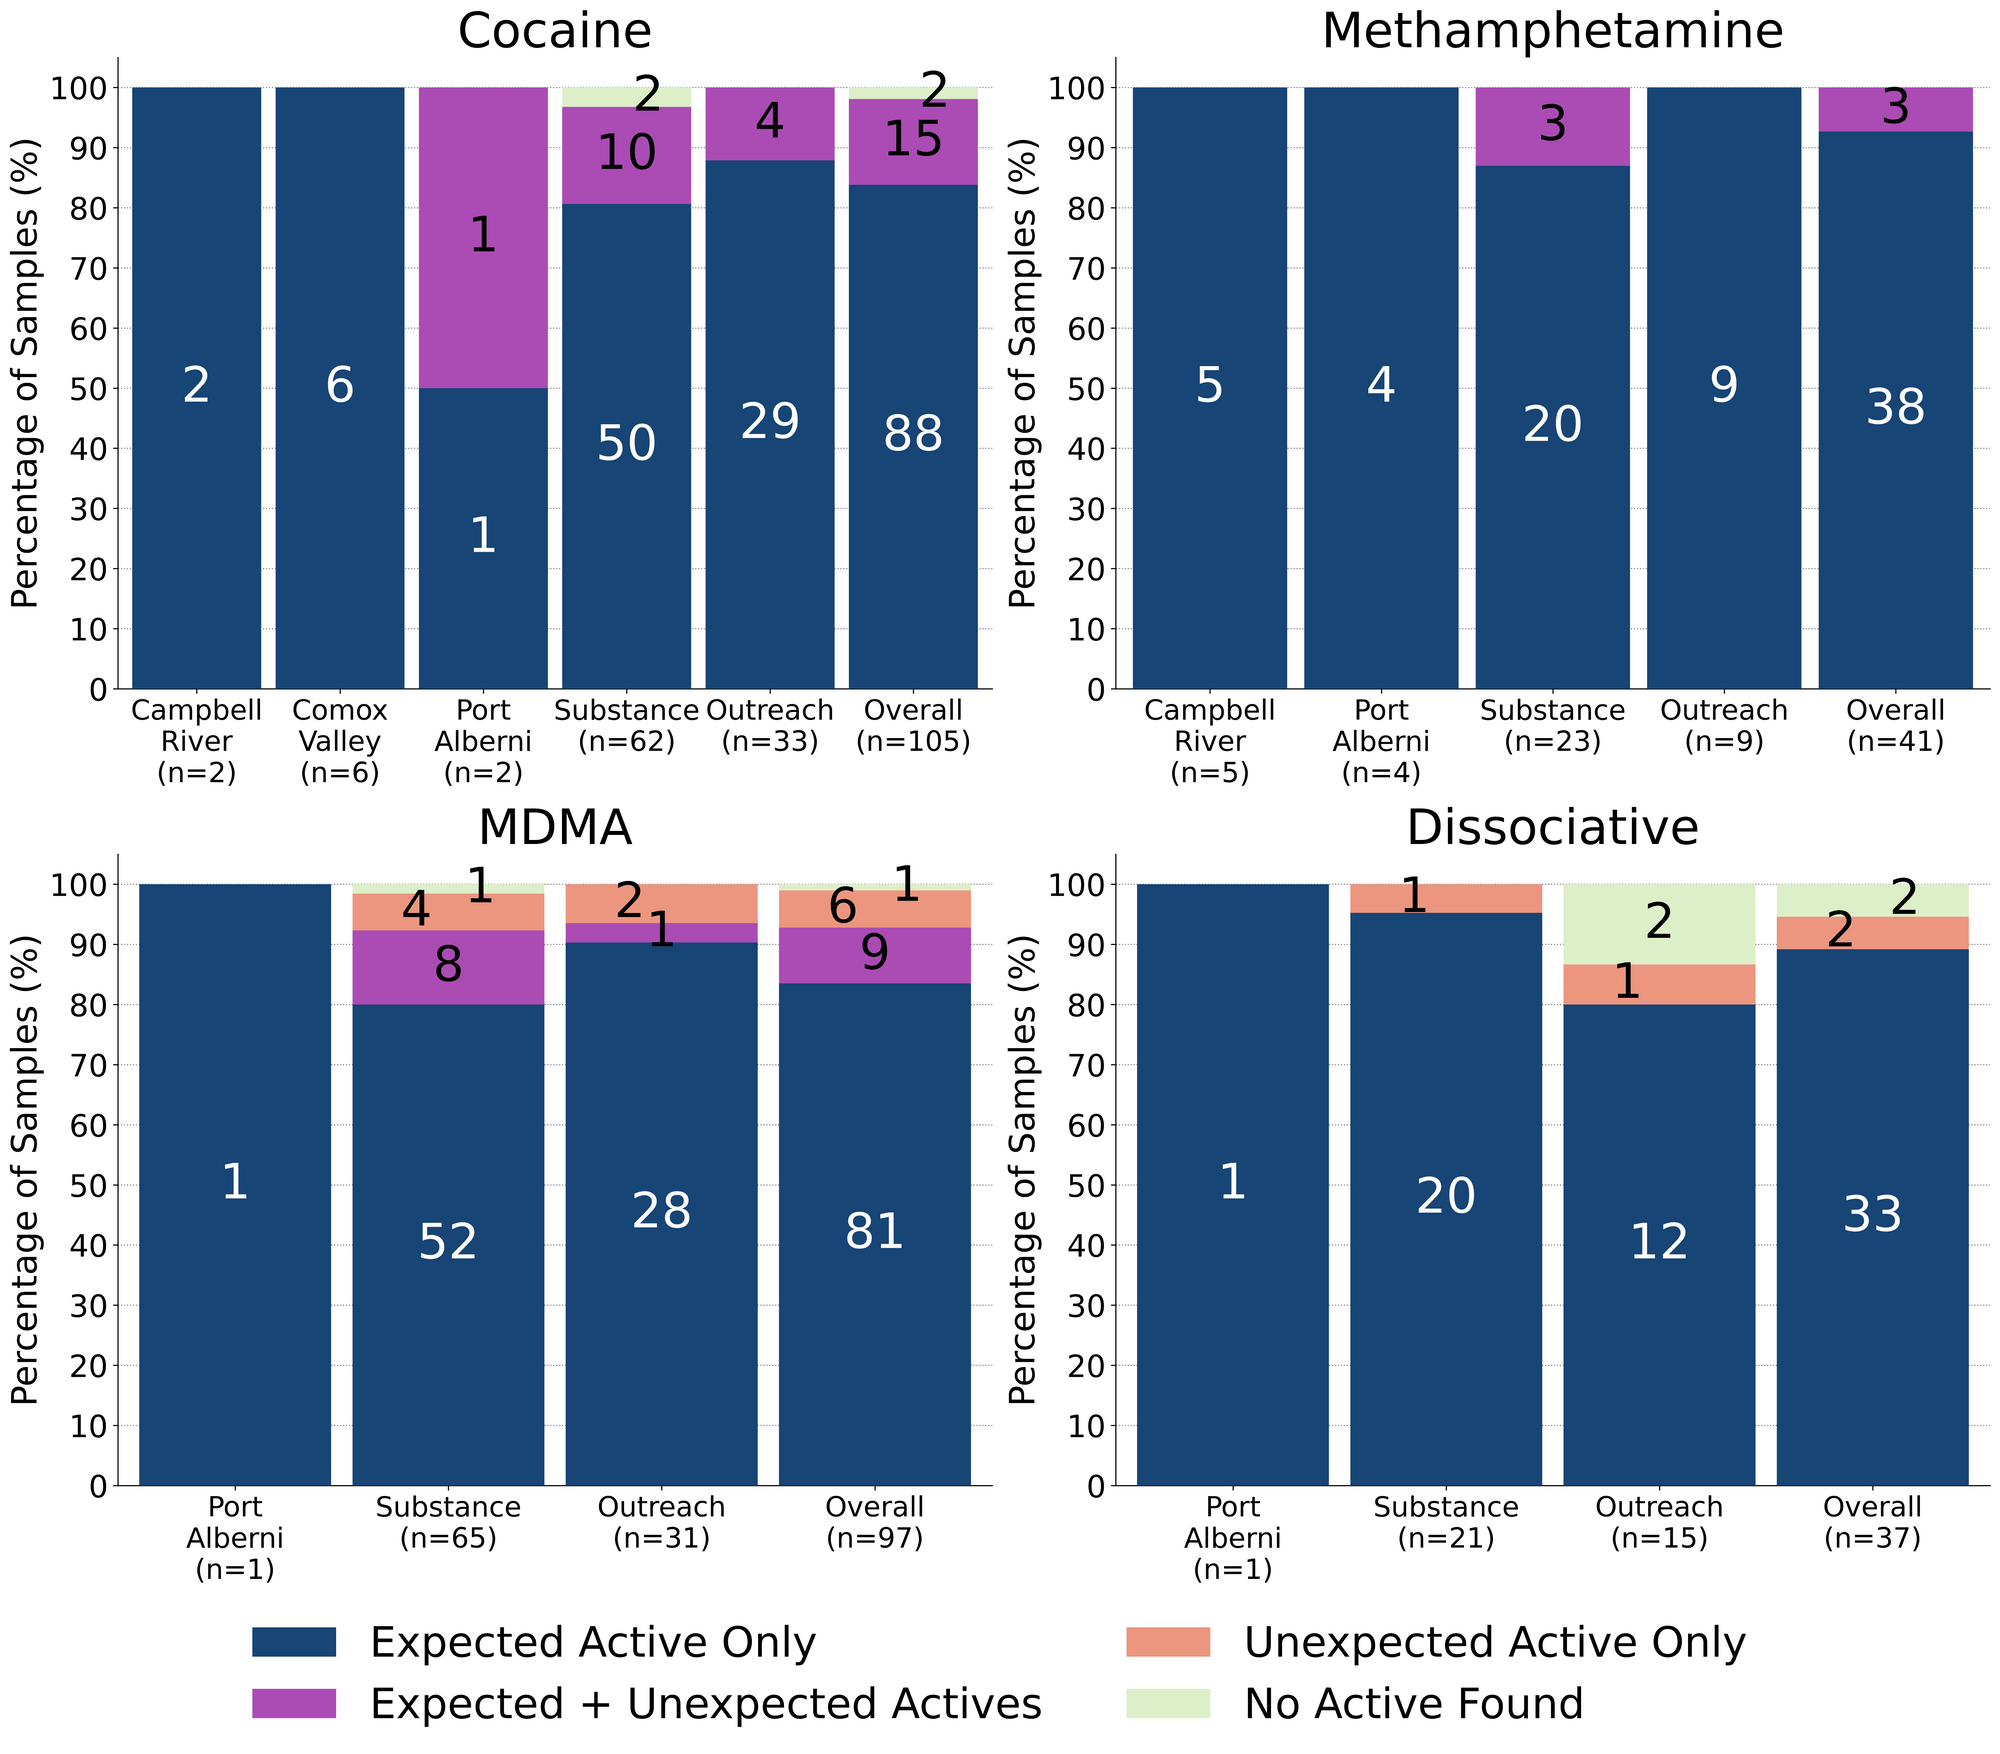 Figure 2. Adulteration breakdown by drug class and sample collection location/method. Bars are stacked by percentage of samples in each category, with the individual sample counts overlaid. Dark Blue regions group samples that were simply as expected with no other notable compounds detected, Magenta shows samples that contained the expected drug and were contaminated with an unexpected active, Salmon groups samples that only contained an unexpected active (the expected drug was not found), and Yellow displays samples where no active compounds were detected.